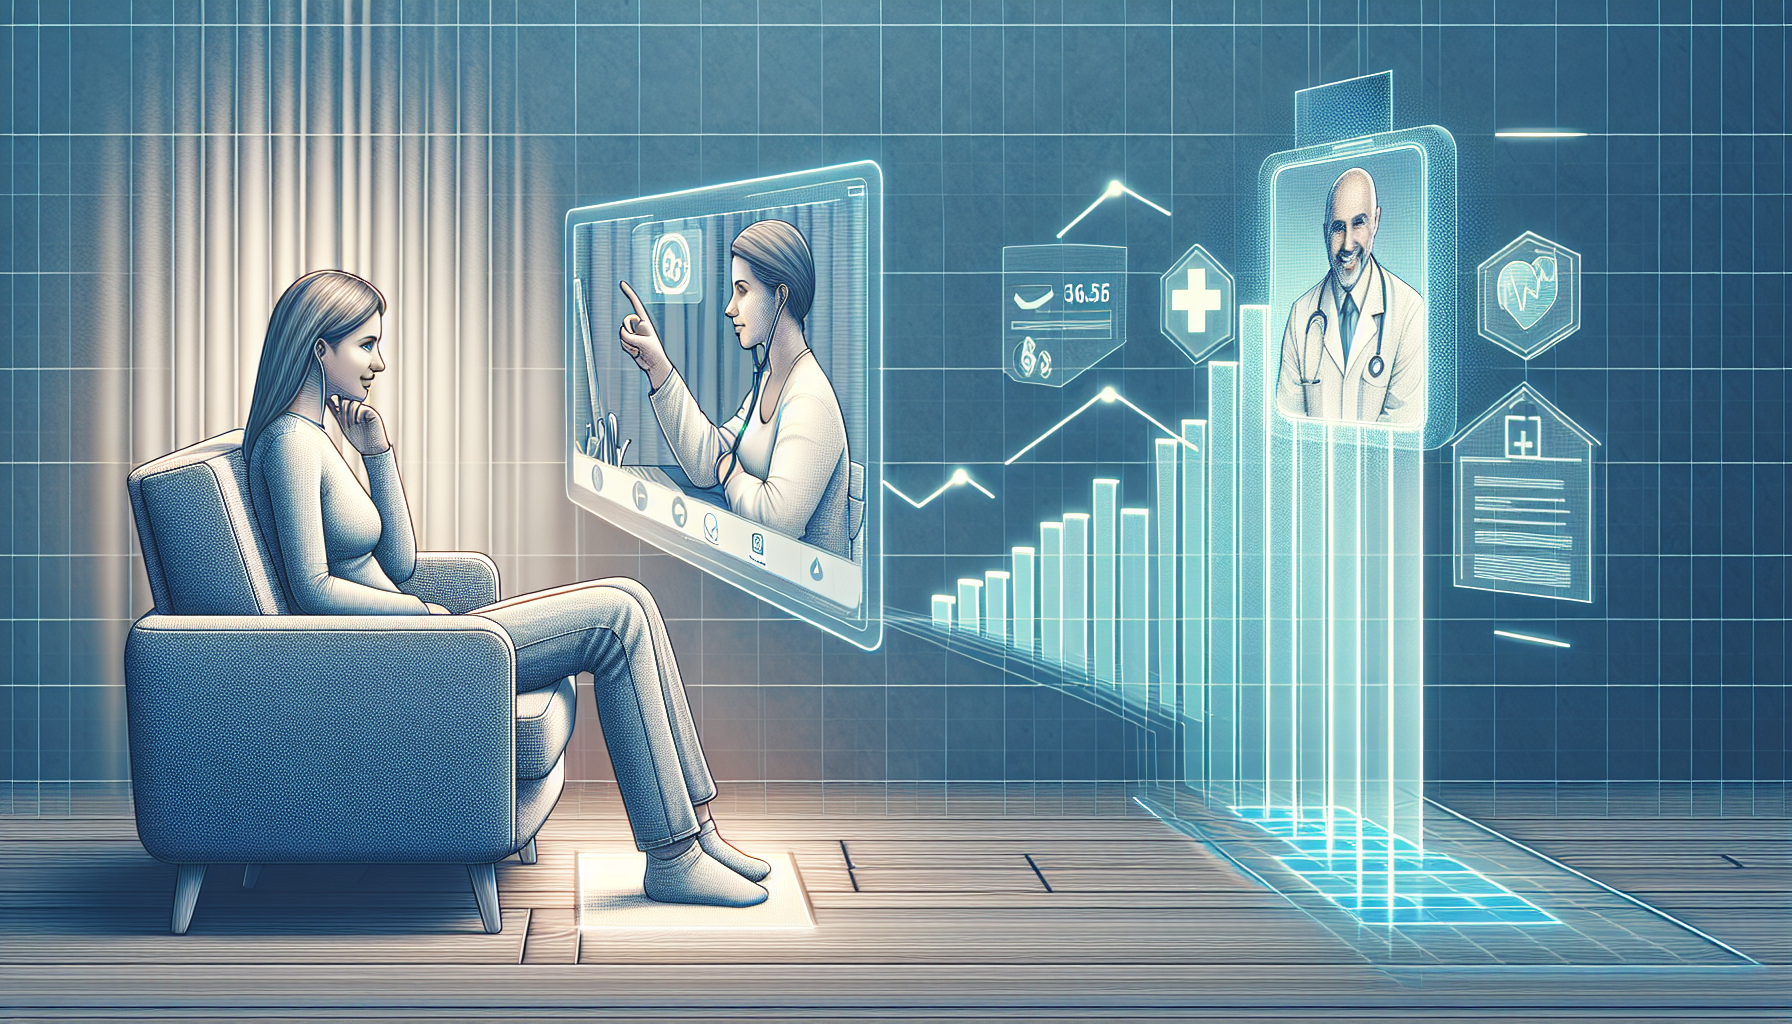 Telehealth and virtual care services in healthcare